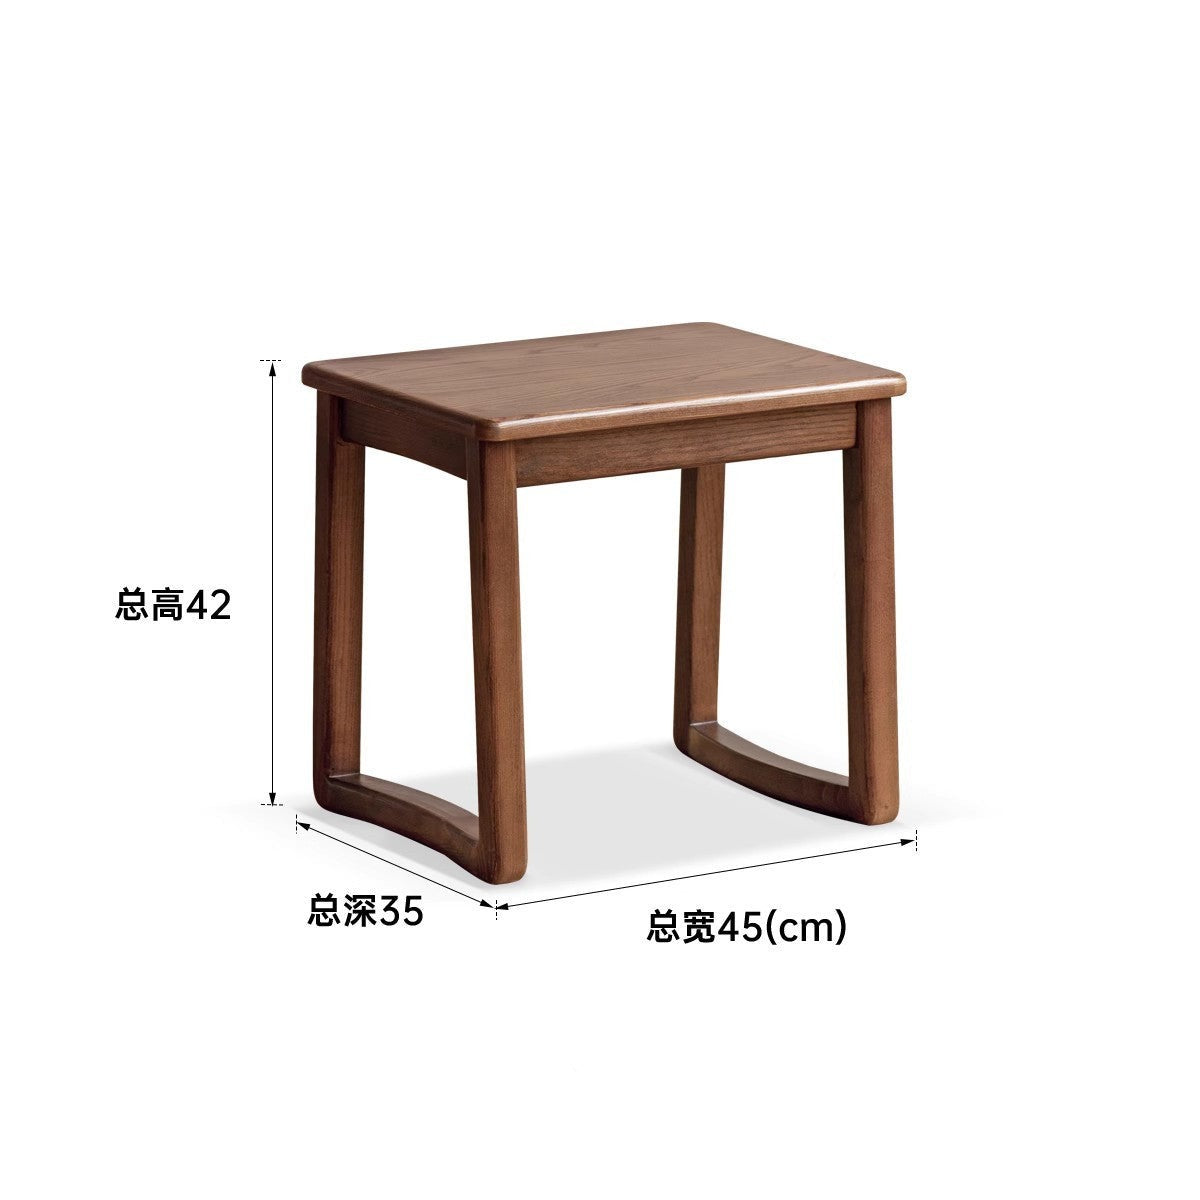 Ash Solid Wood Modern White Wax Wood Square Stool